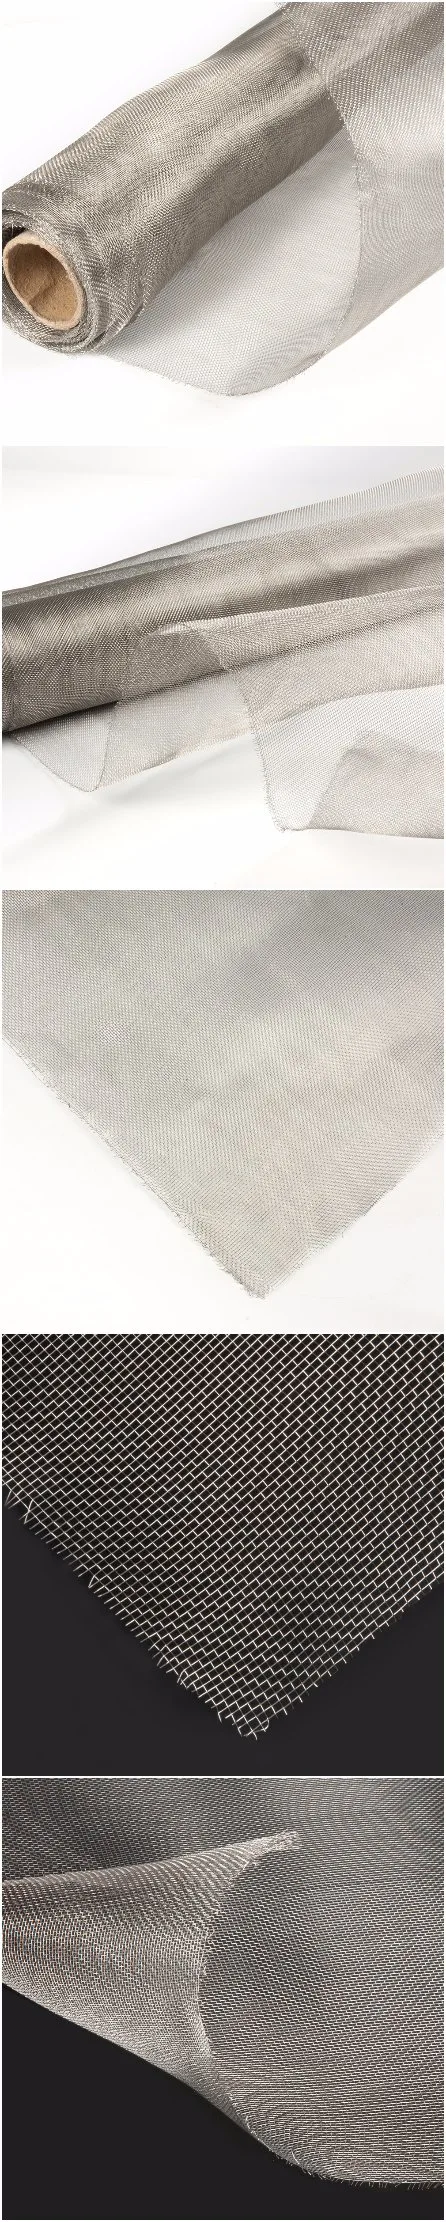 Stainless Steel Type 304 316 Wire Mesh Stainless Steel Insect Screen Mesh